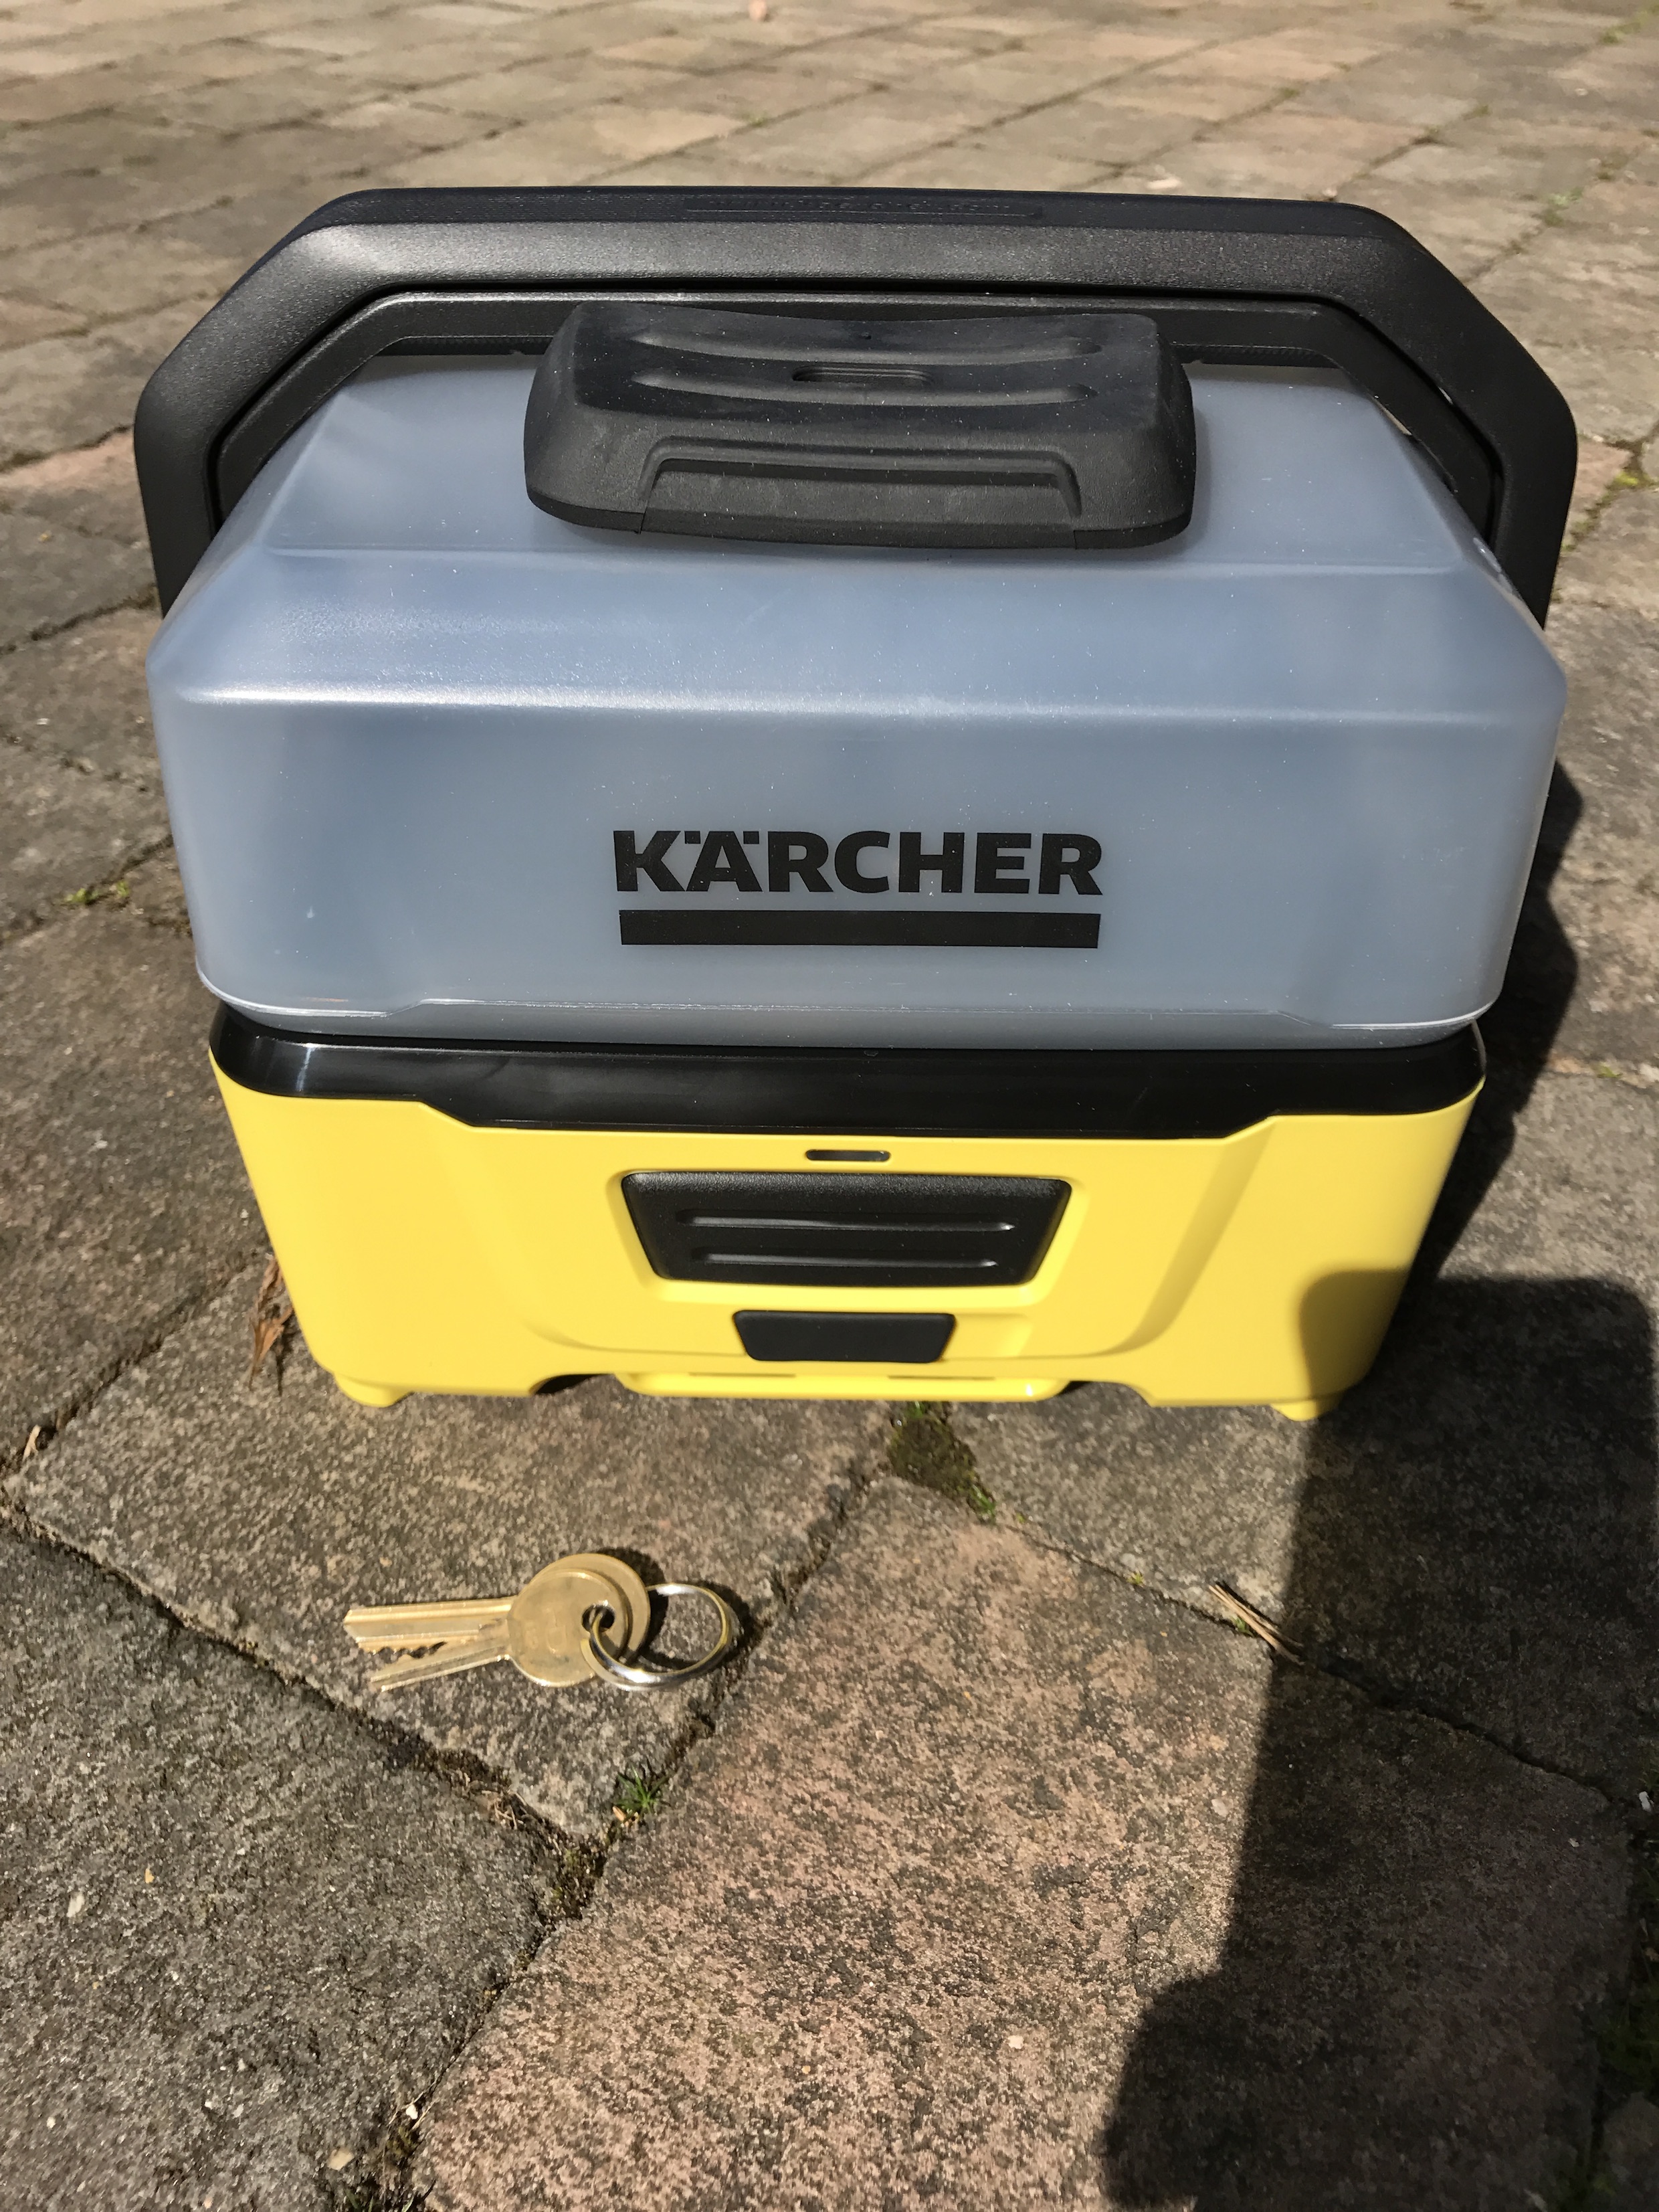 Karcher OC3 mobile cleaner - full rebuild. Why it stopped pumping